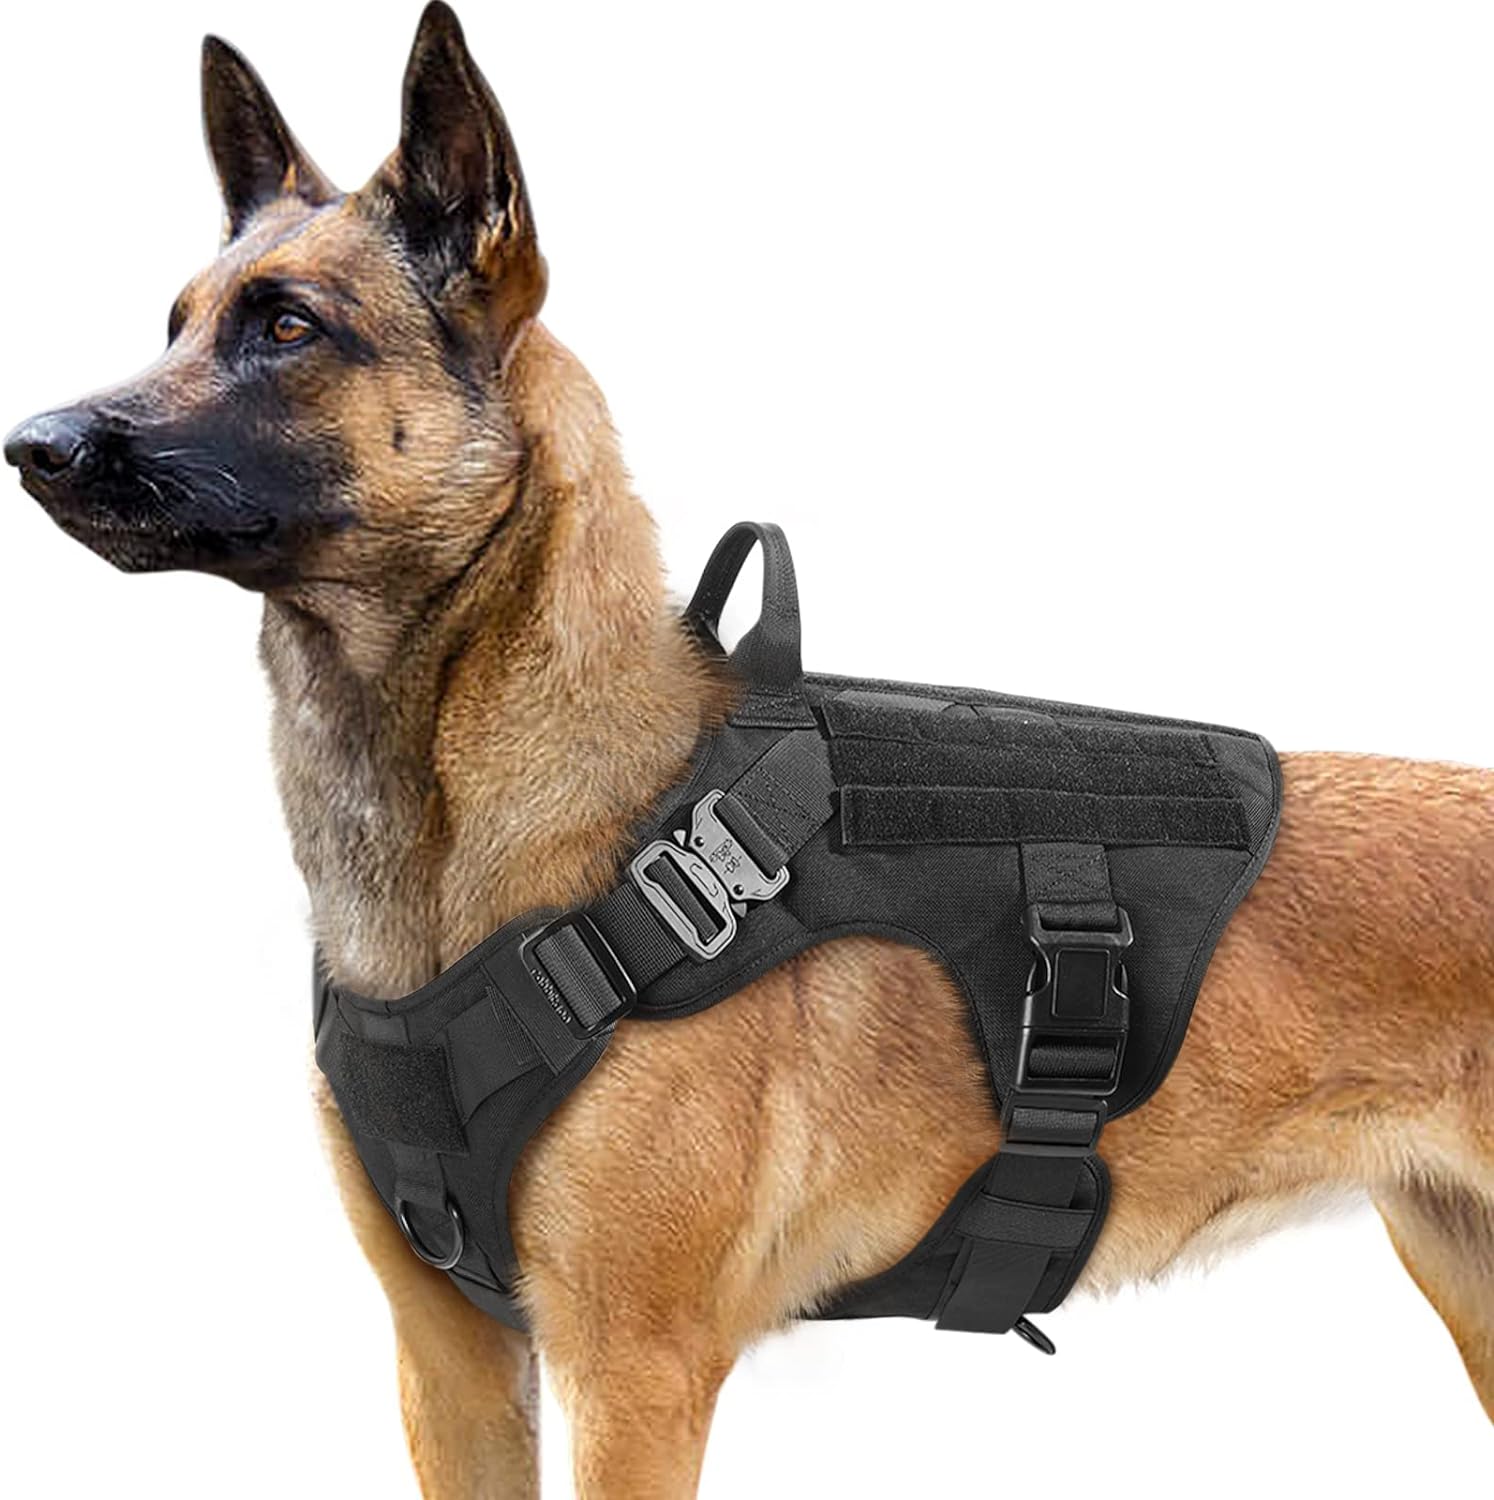 rabbitgoo Tactical Dog Harness for Large Dogs, Heavy Duty with Handle, No-Pull Service Vest Breed, Adjustable Military Training Hunting Walking, Black, L